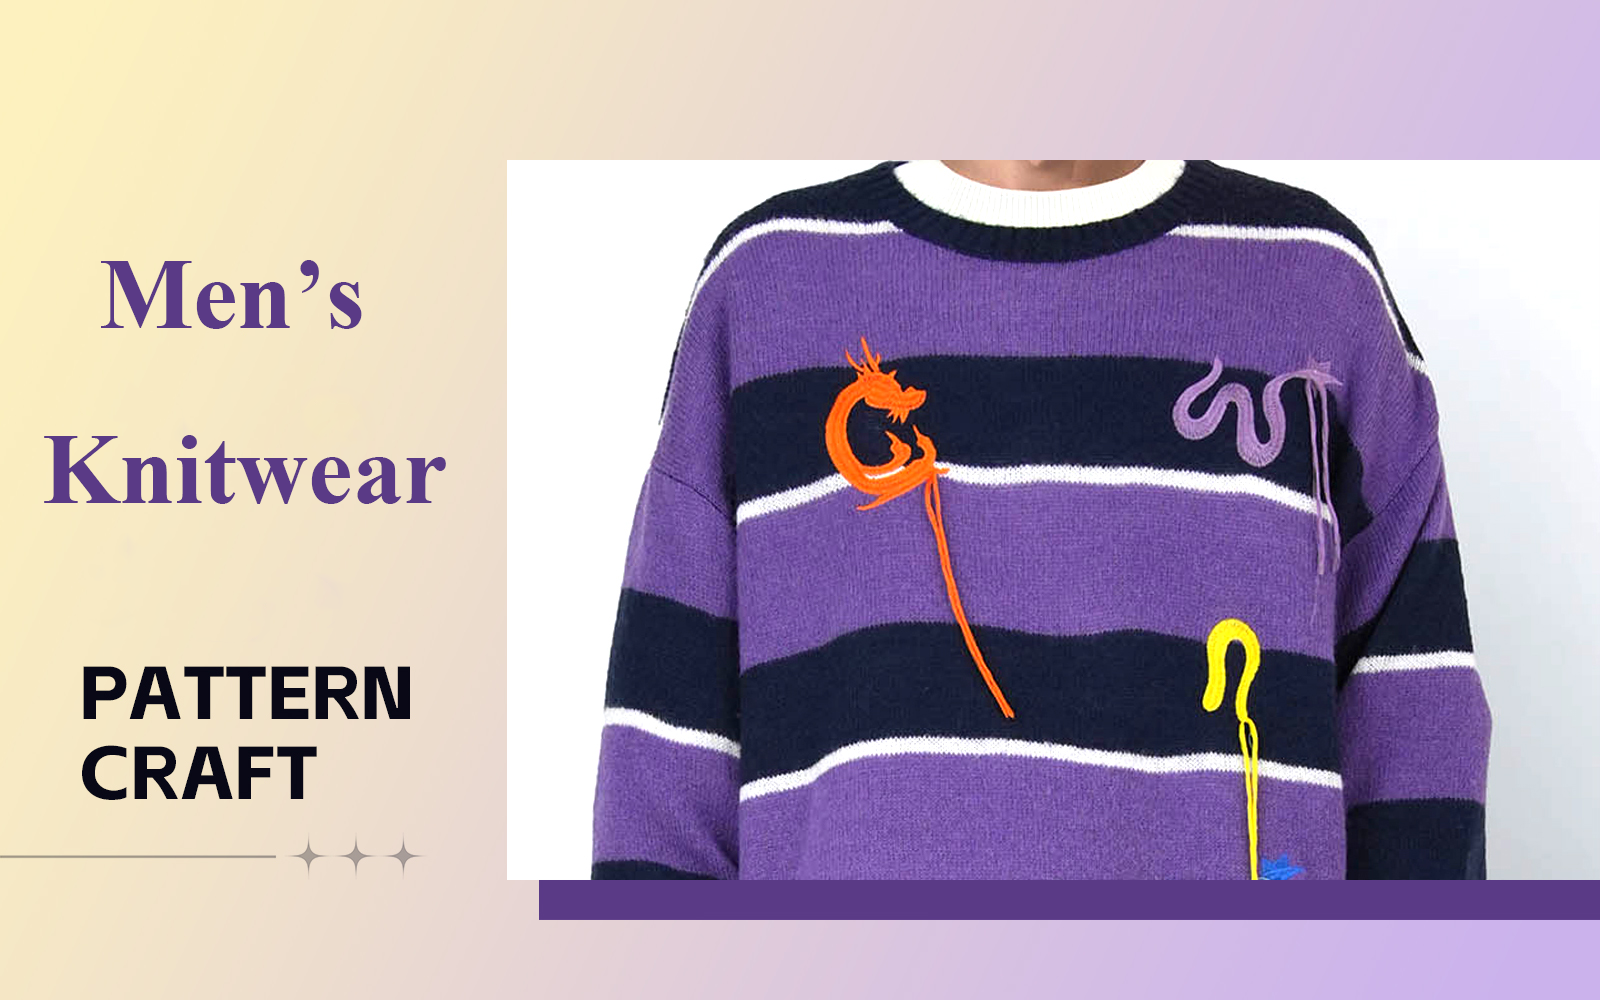 The Pattern Craft Trend for Men's Knitwear